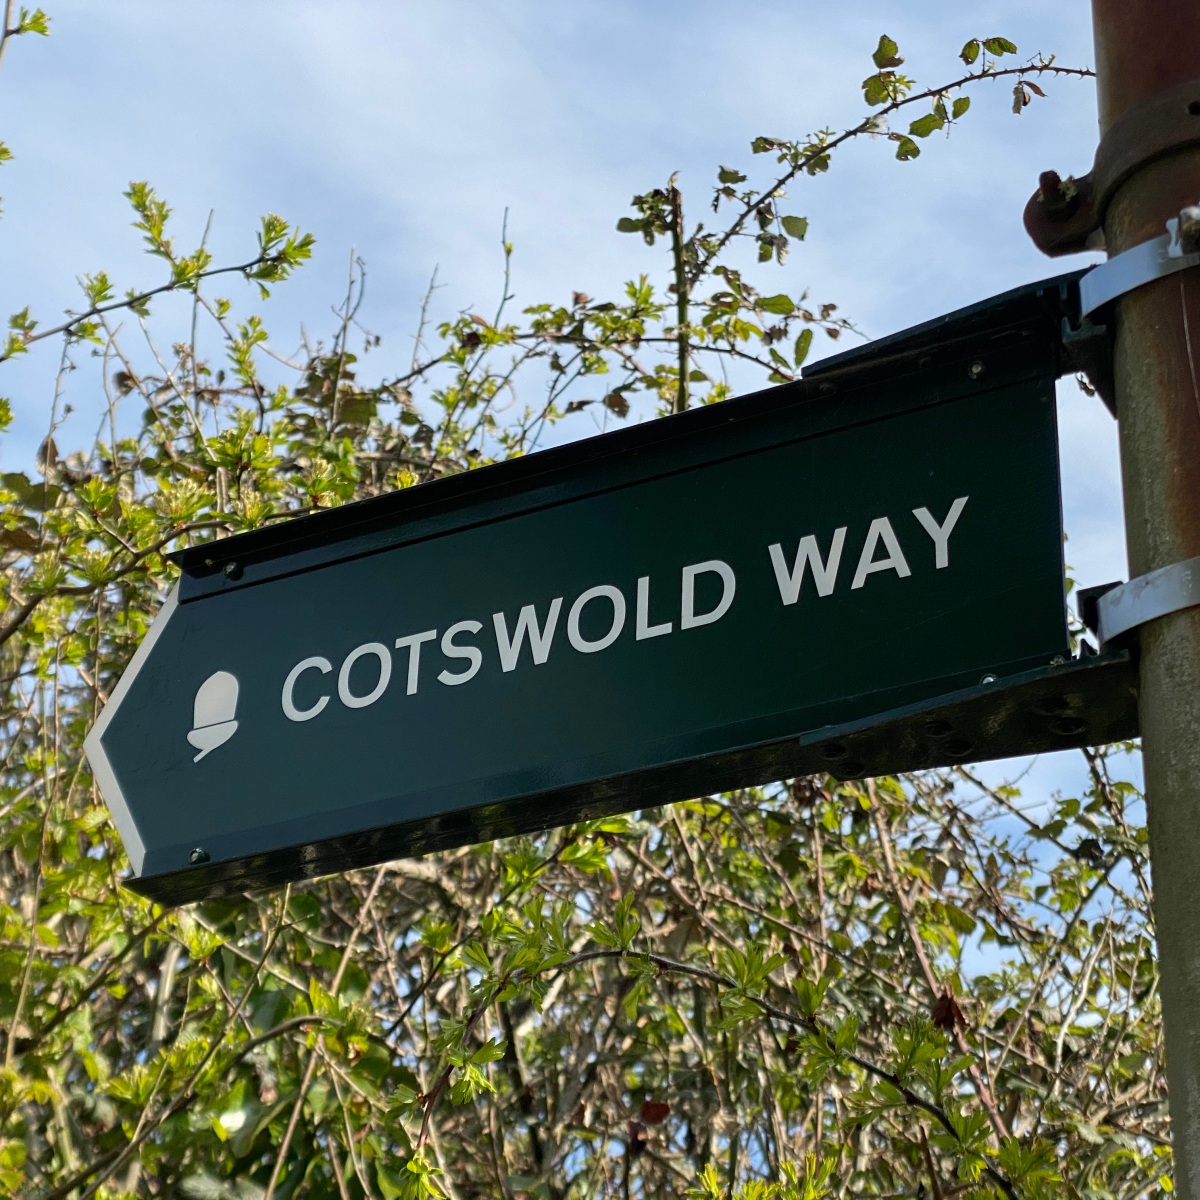 Cotswold Way, part 1 – Chipping Camden to Stanway – 12 miles (19.5km)